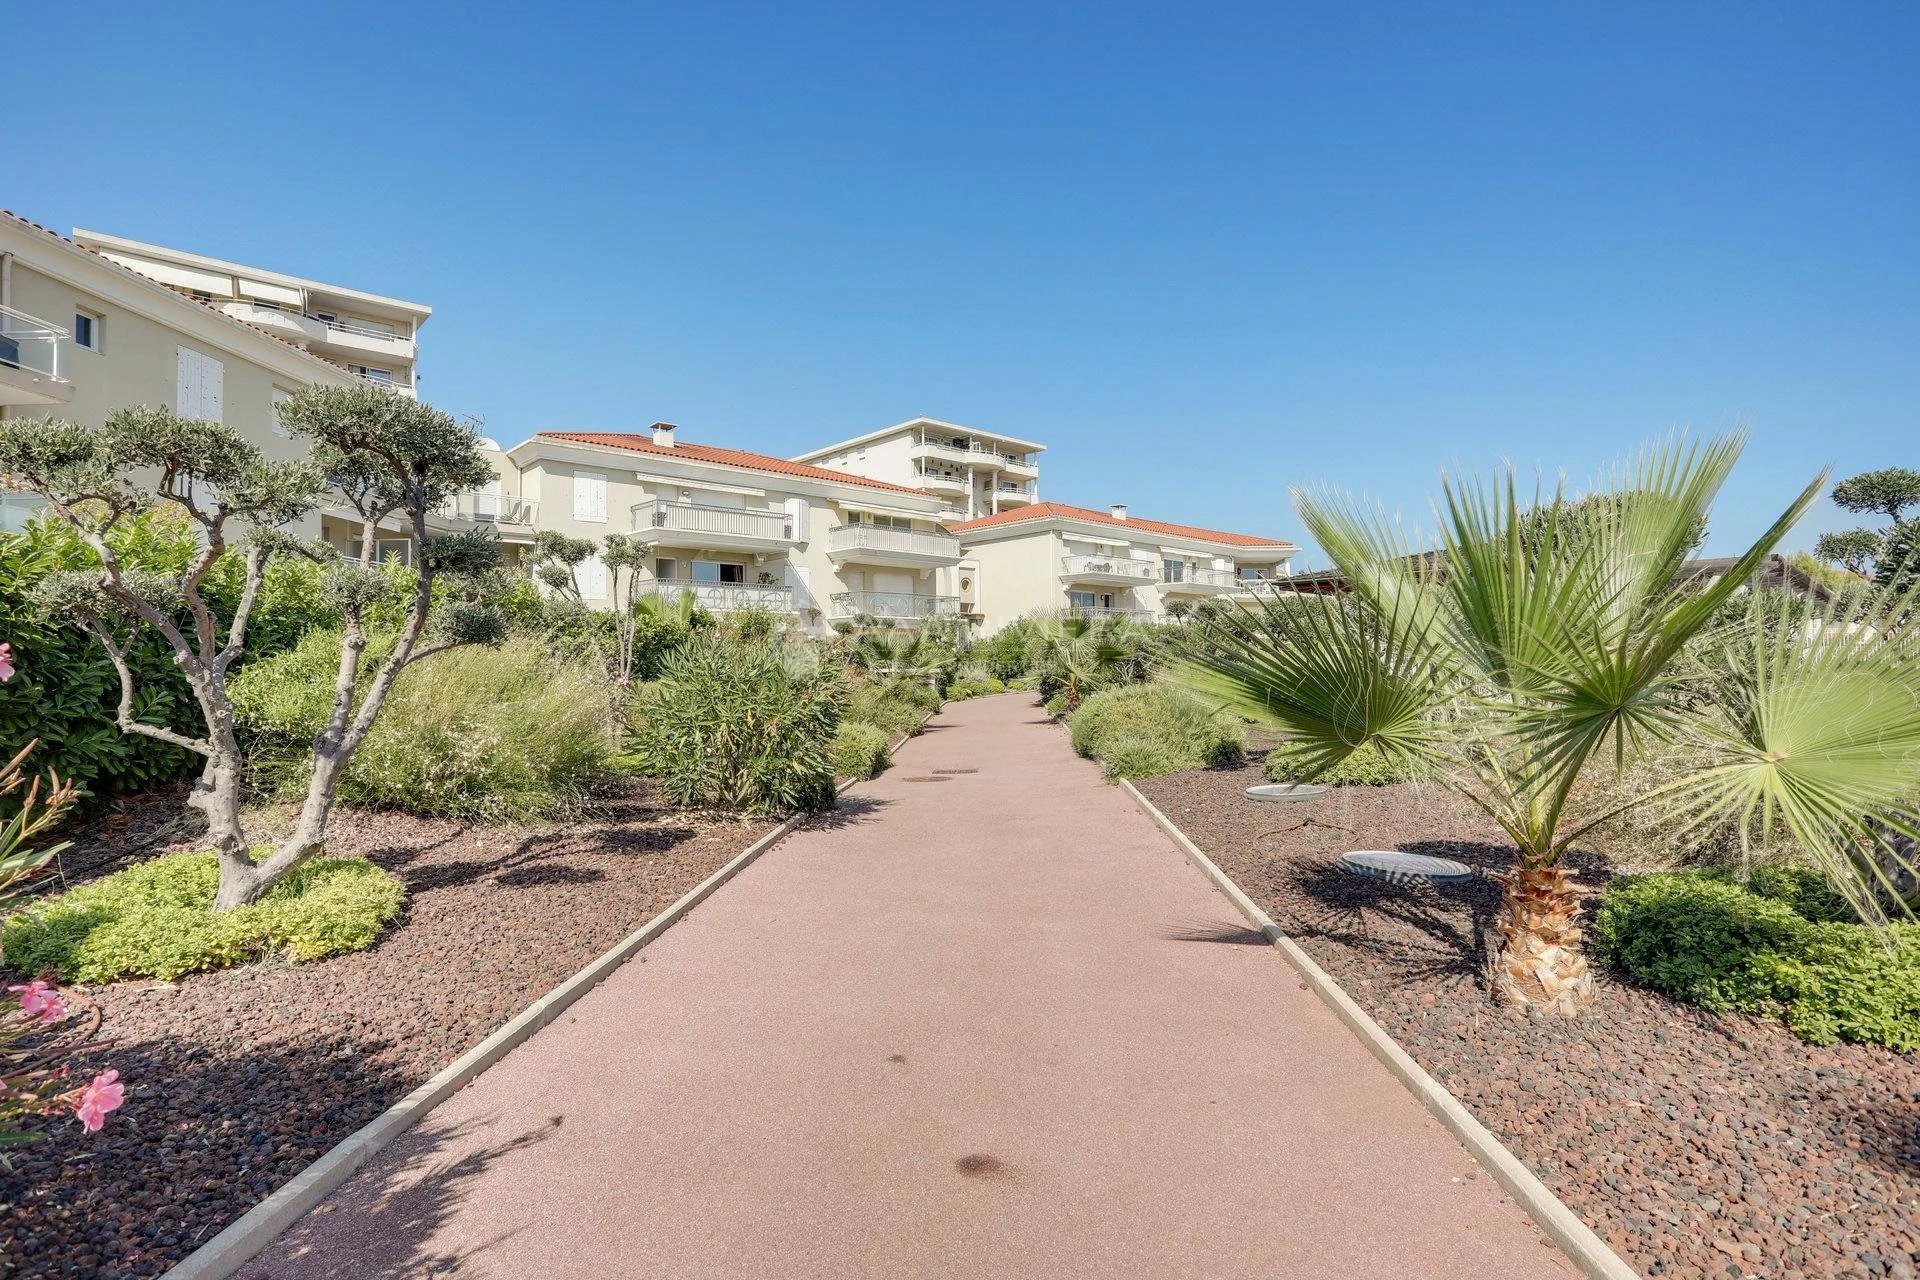 SOLE AGENT - UNDER OFFER  - 2 bedroom apt in residence with pool right on the beaches of Juan les Pins